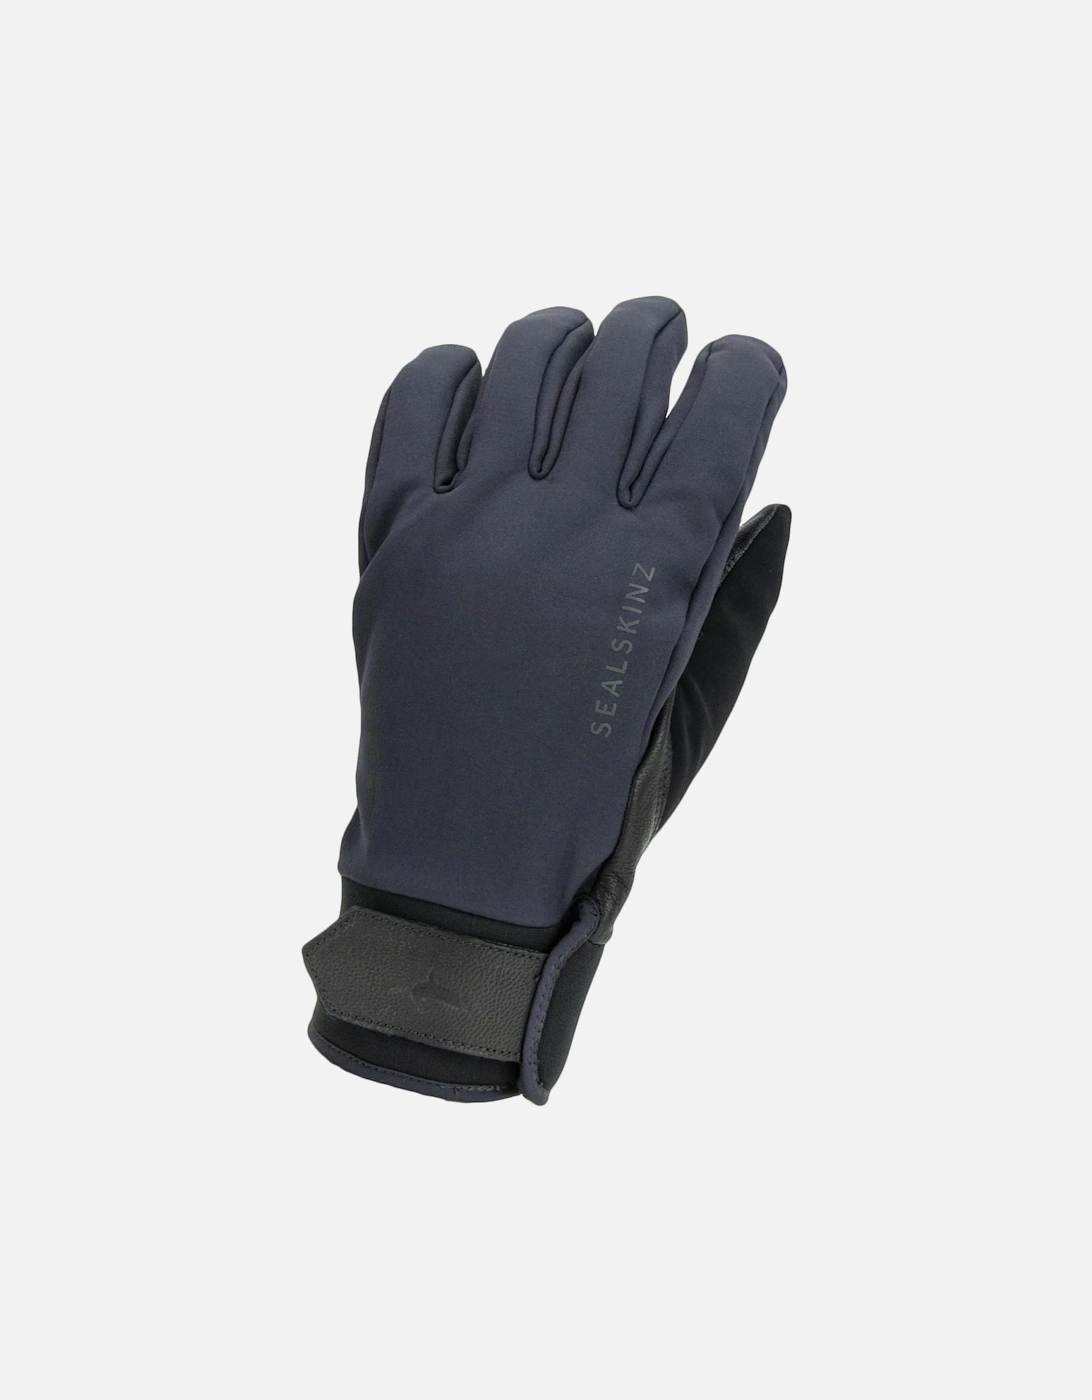 Kelling Waterproof All Weather Insulated Gloves